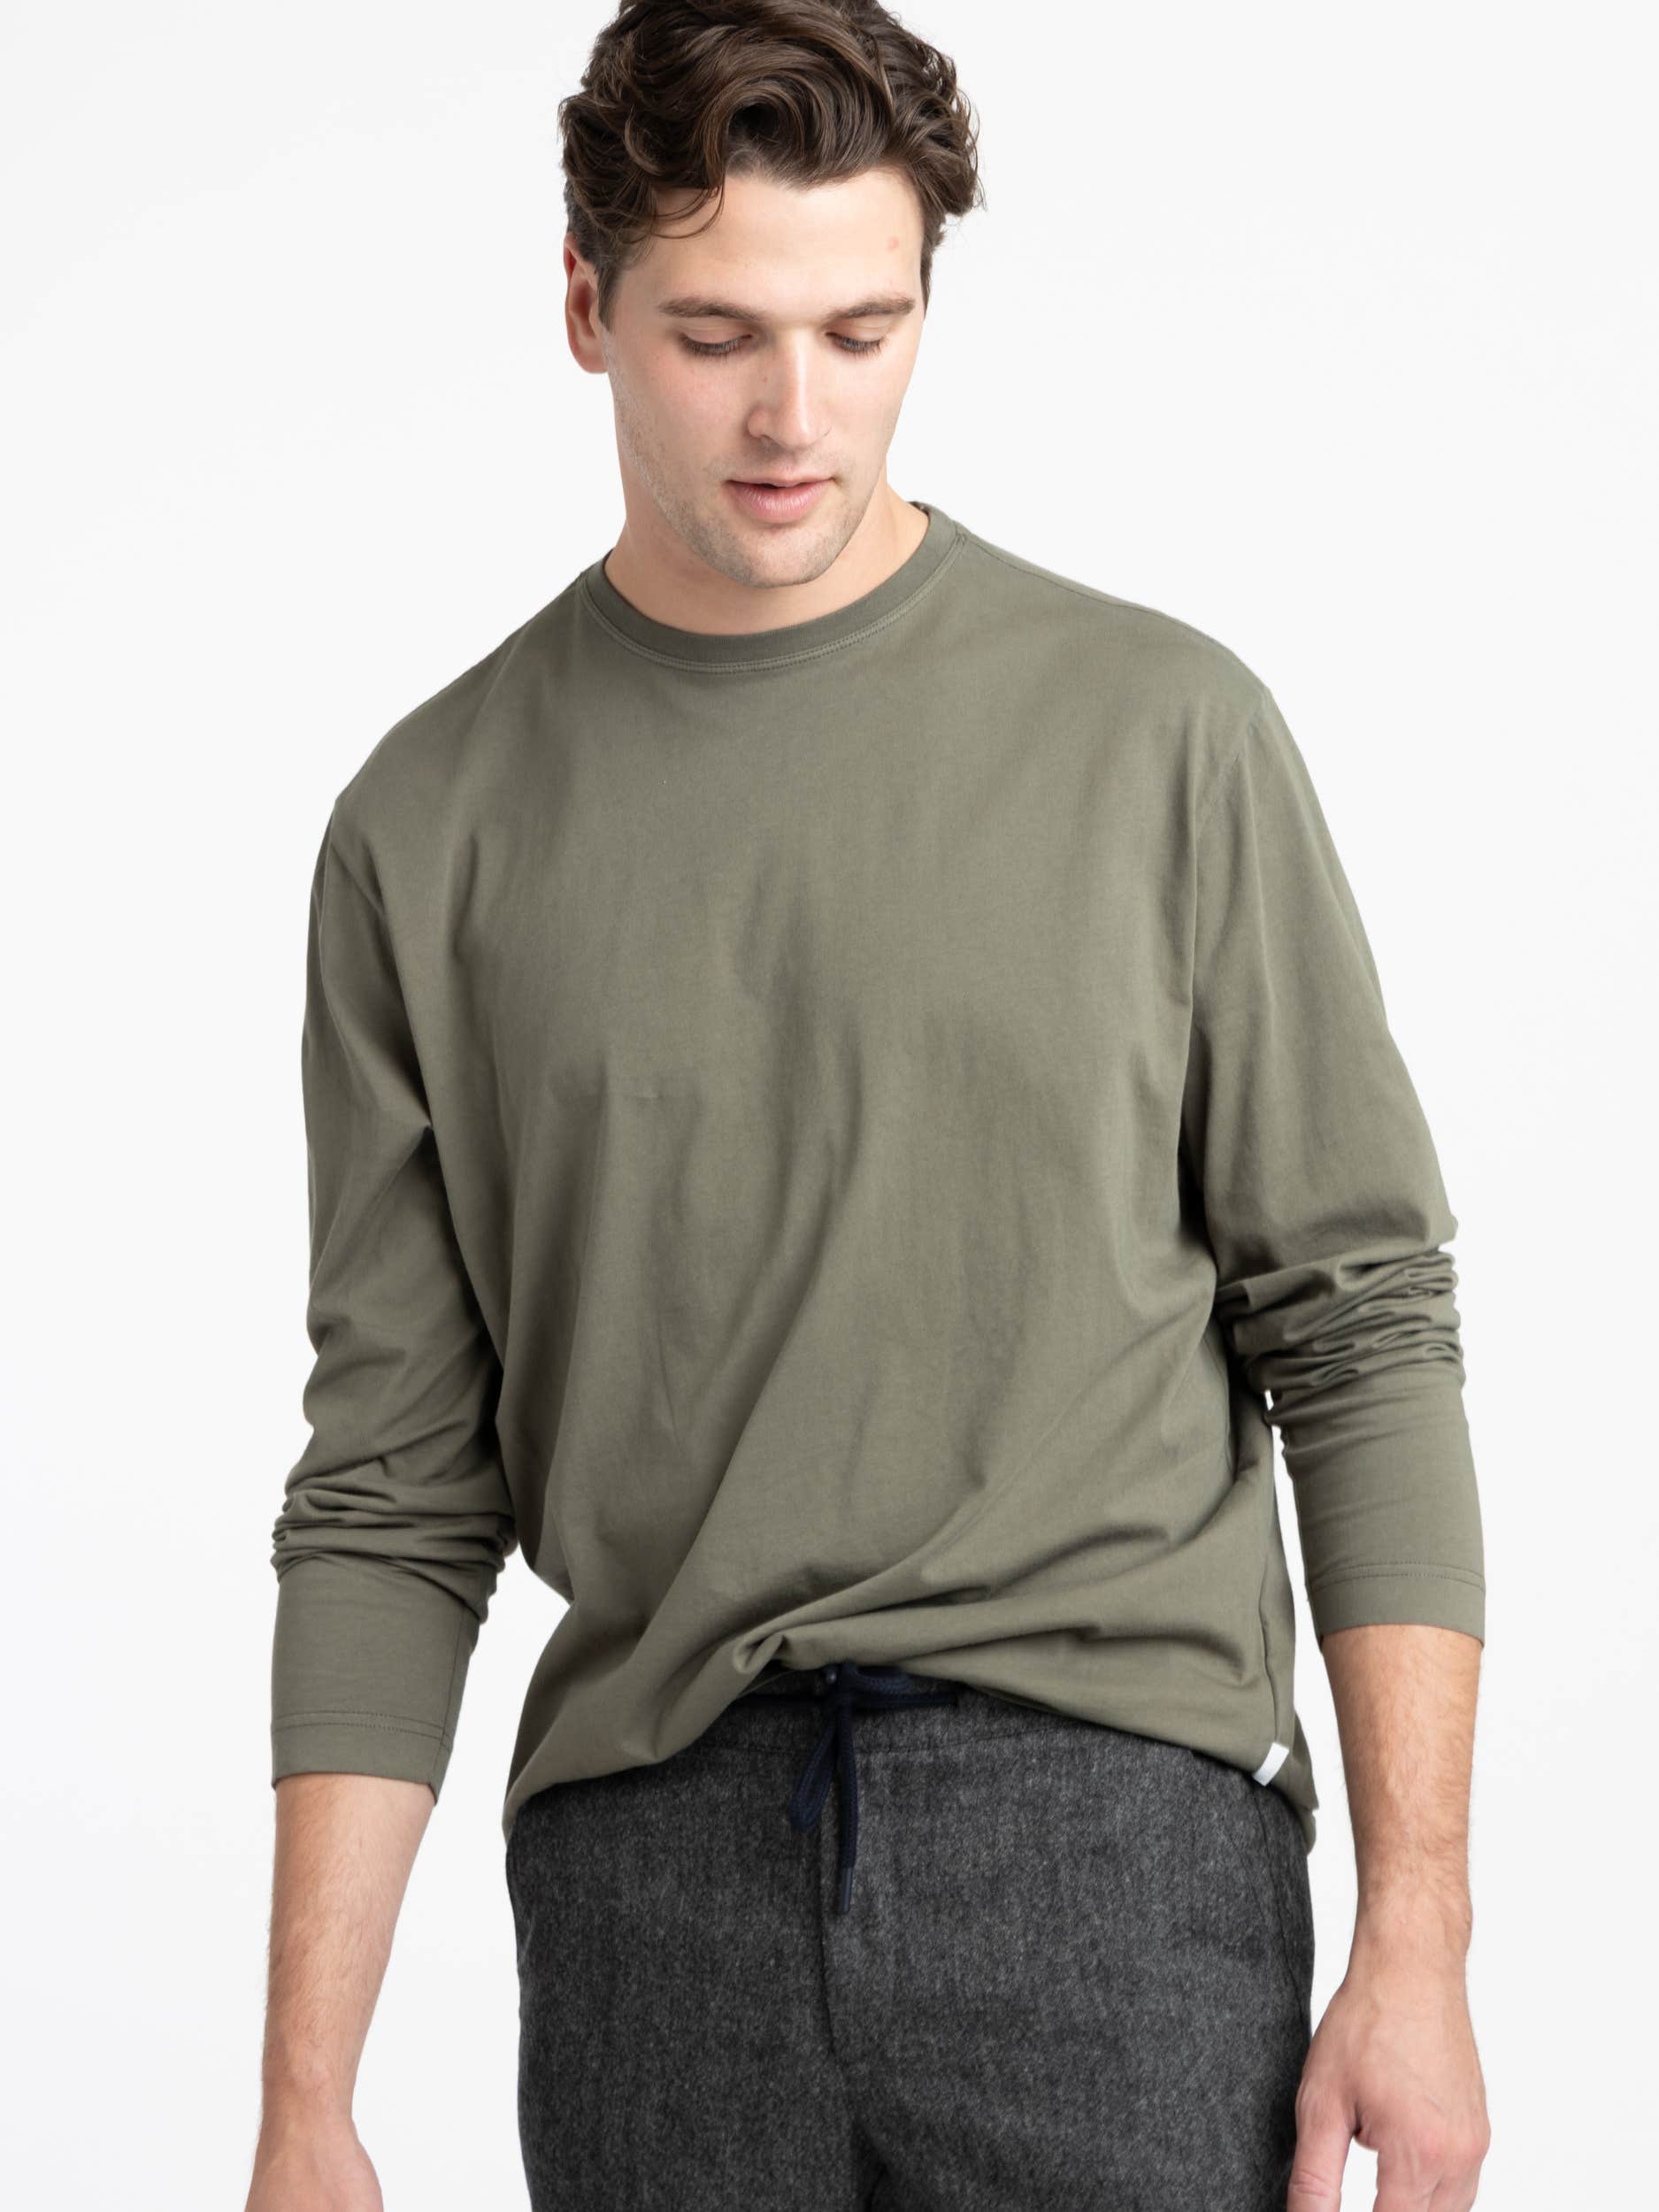 Olive Green Jersey Cotton Shirt